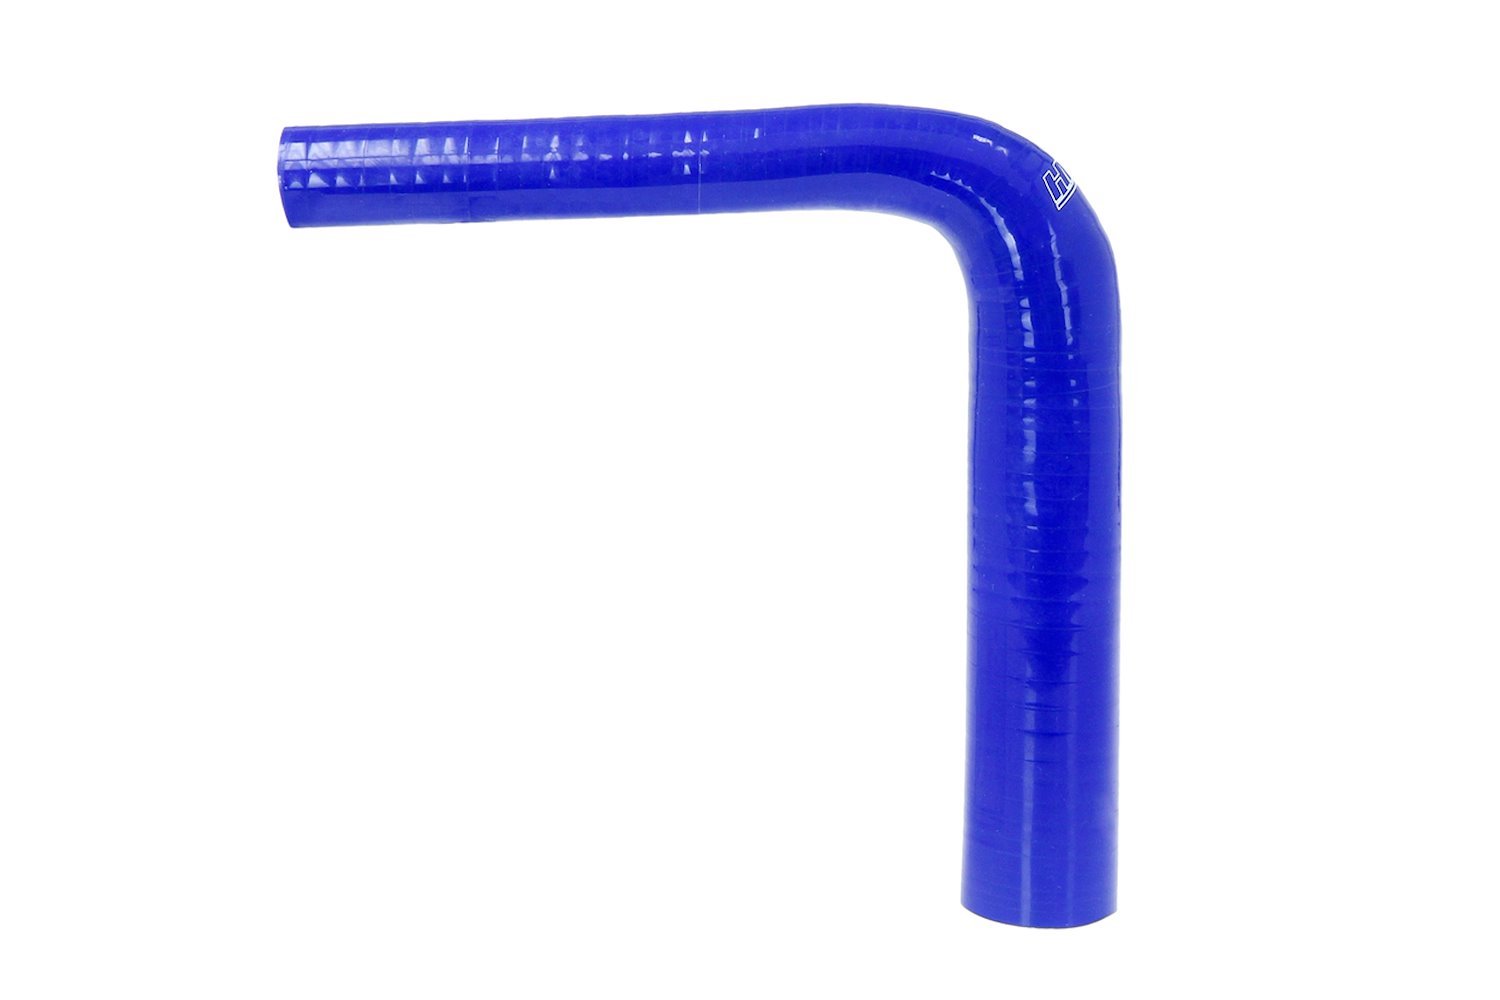 HTSER90-087-125-BLUE Silicone 90-Degree Elbow Hose, High-Temp 4-Ply Reinforced, 7/8 in. - 1-1/4 in. ID, Blue